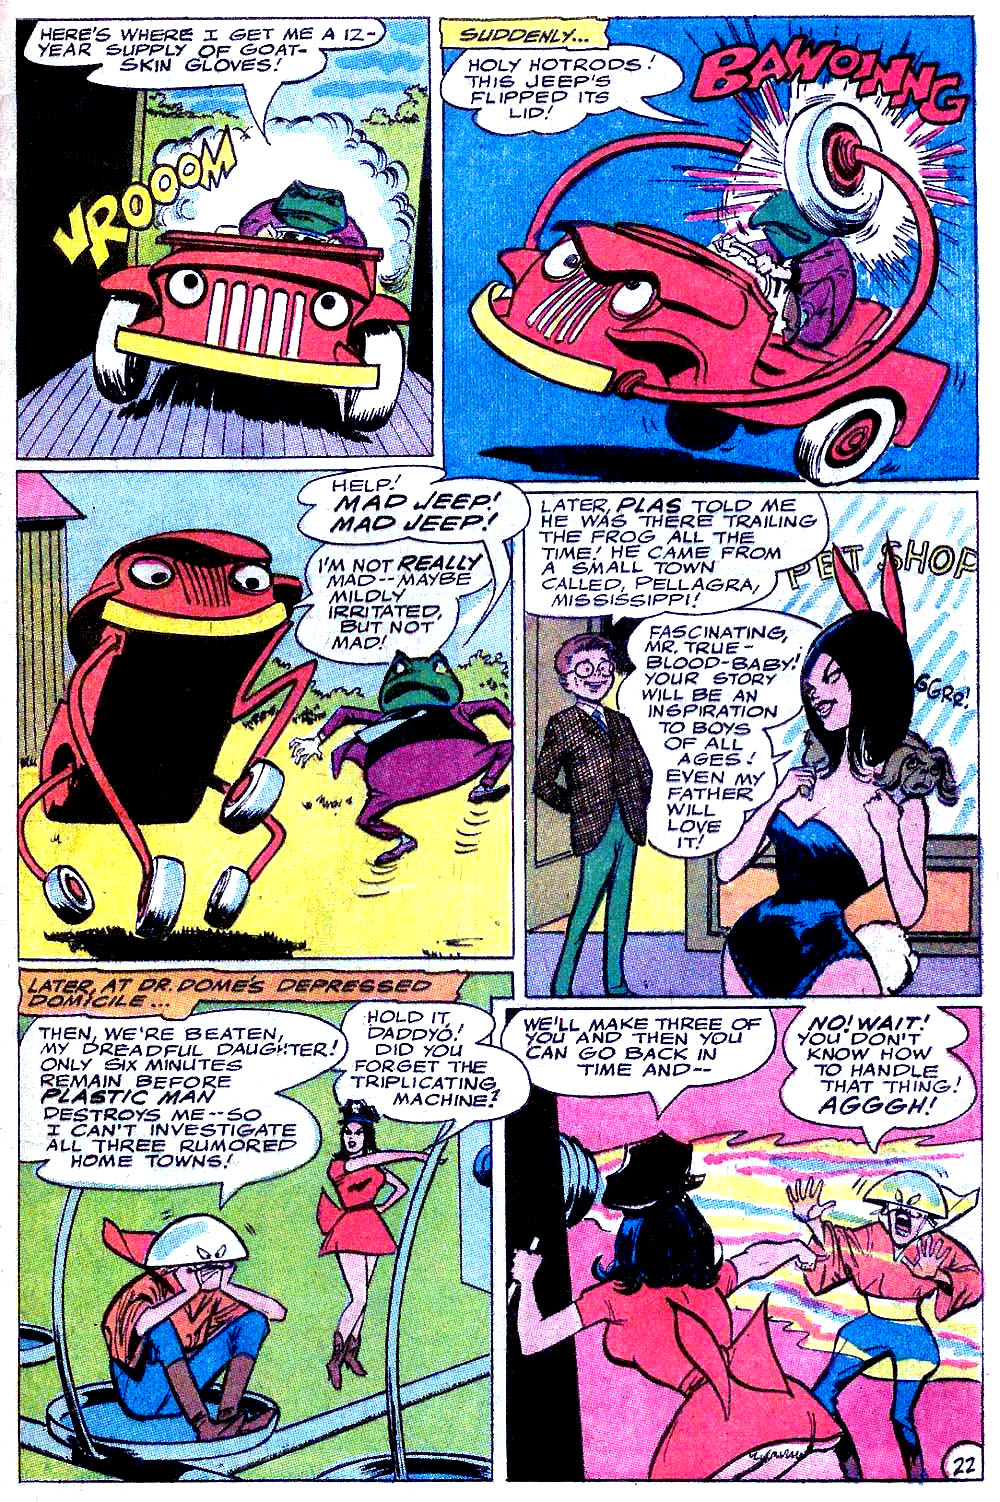 Plastic Man (1966) issue 2 - Page 23